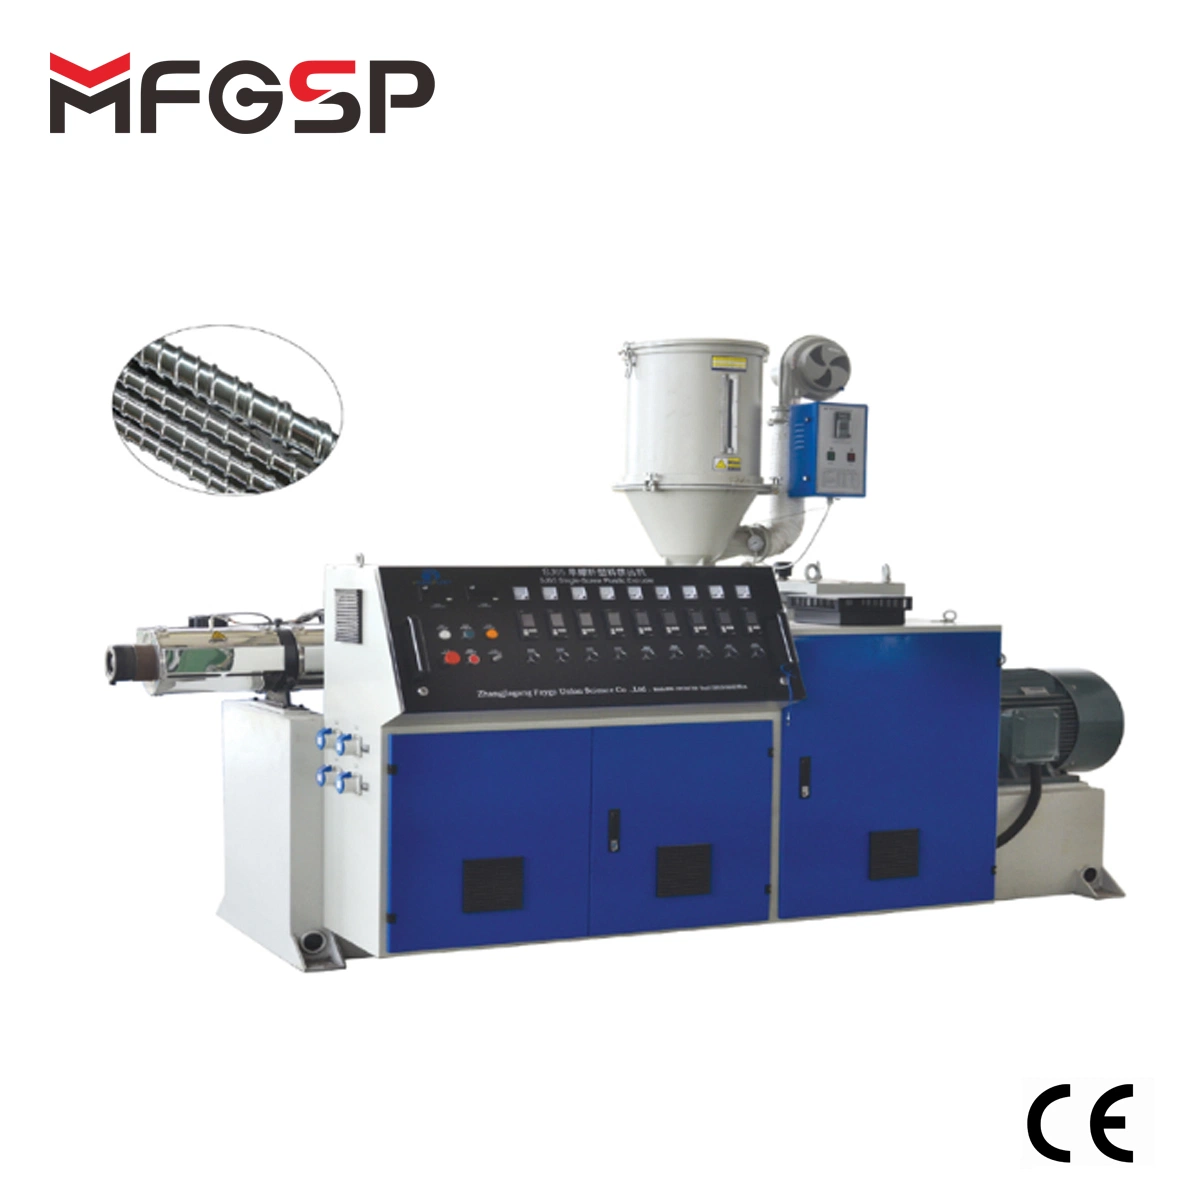 High output Stable extrusion pressure Low cost Single Screw Extruder